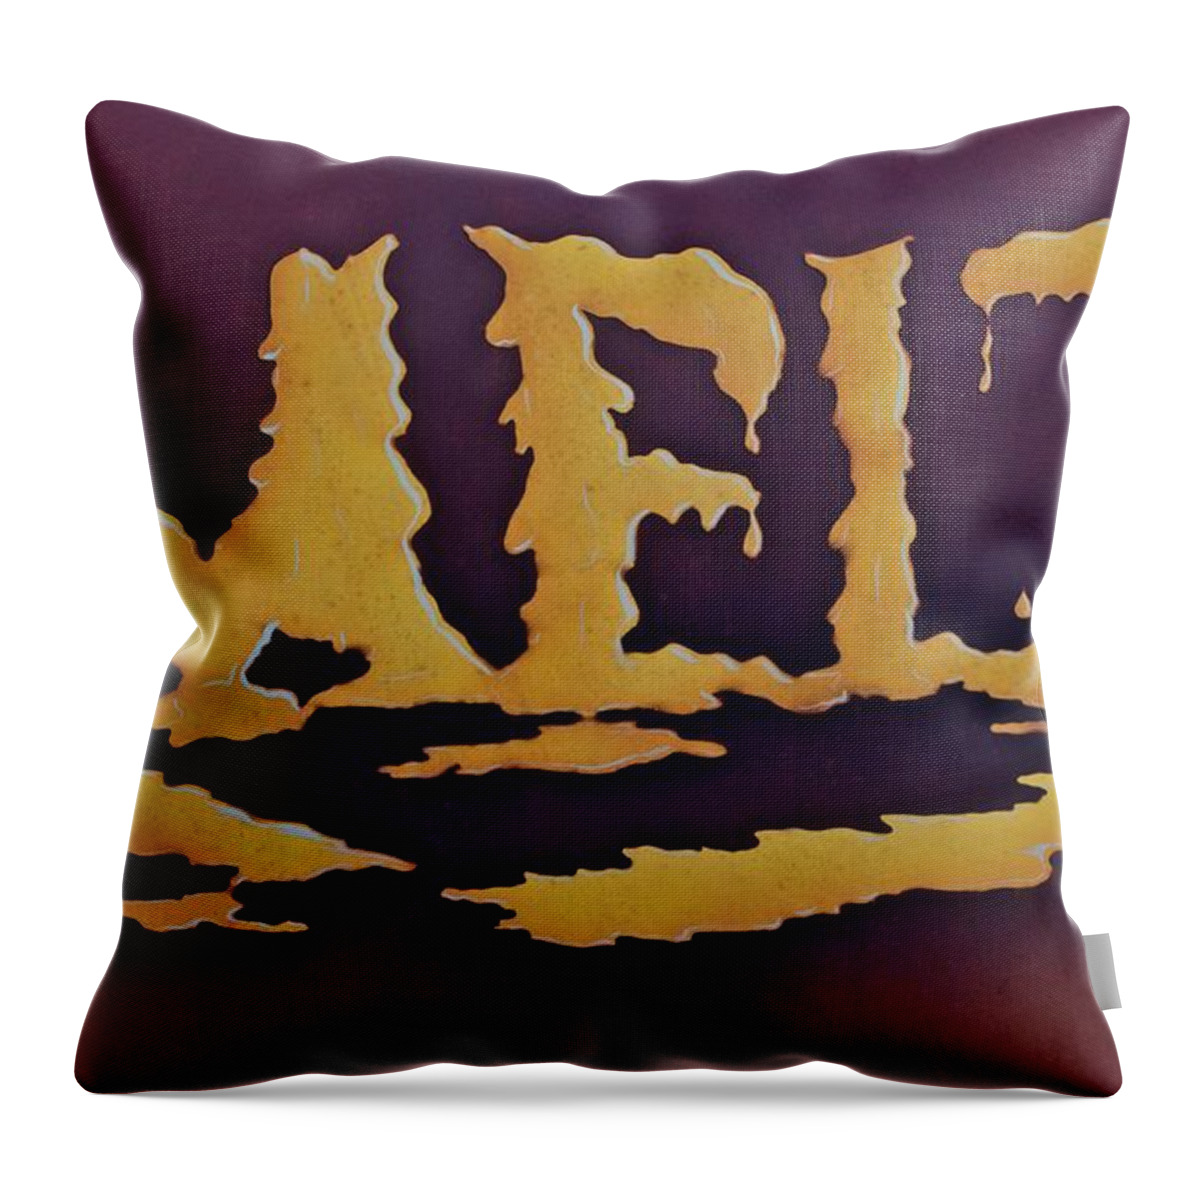 Melt Throw Pillow featuring the painting Melt by AnnaJo Vahle